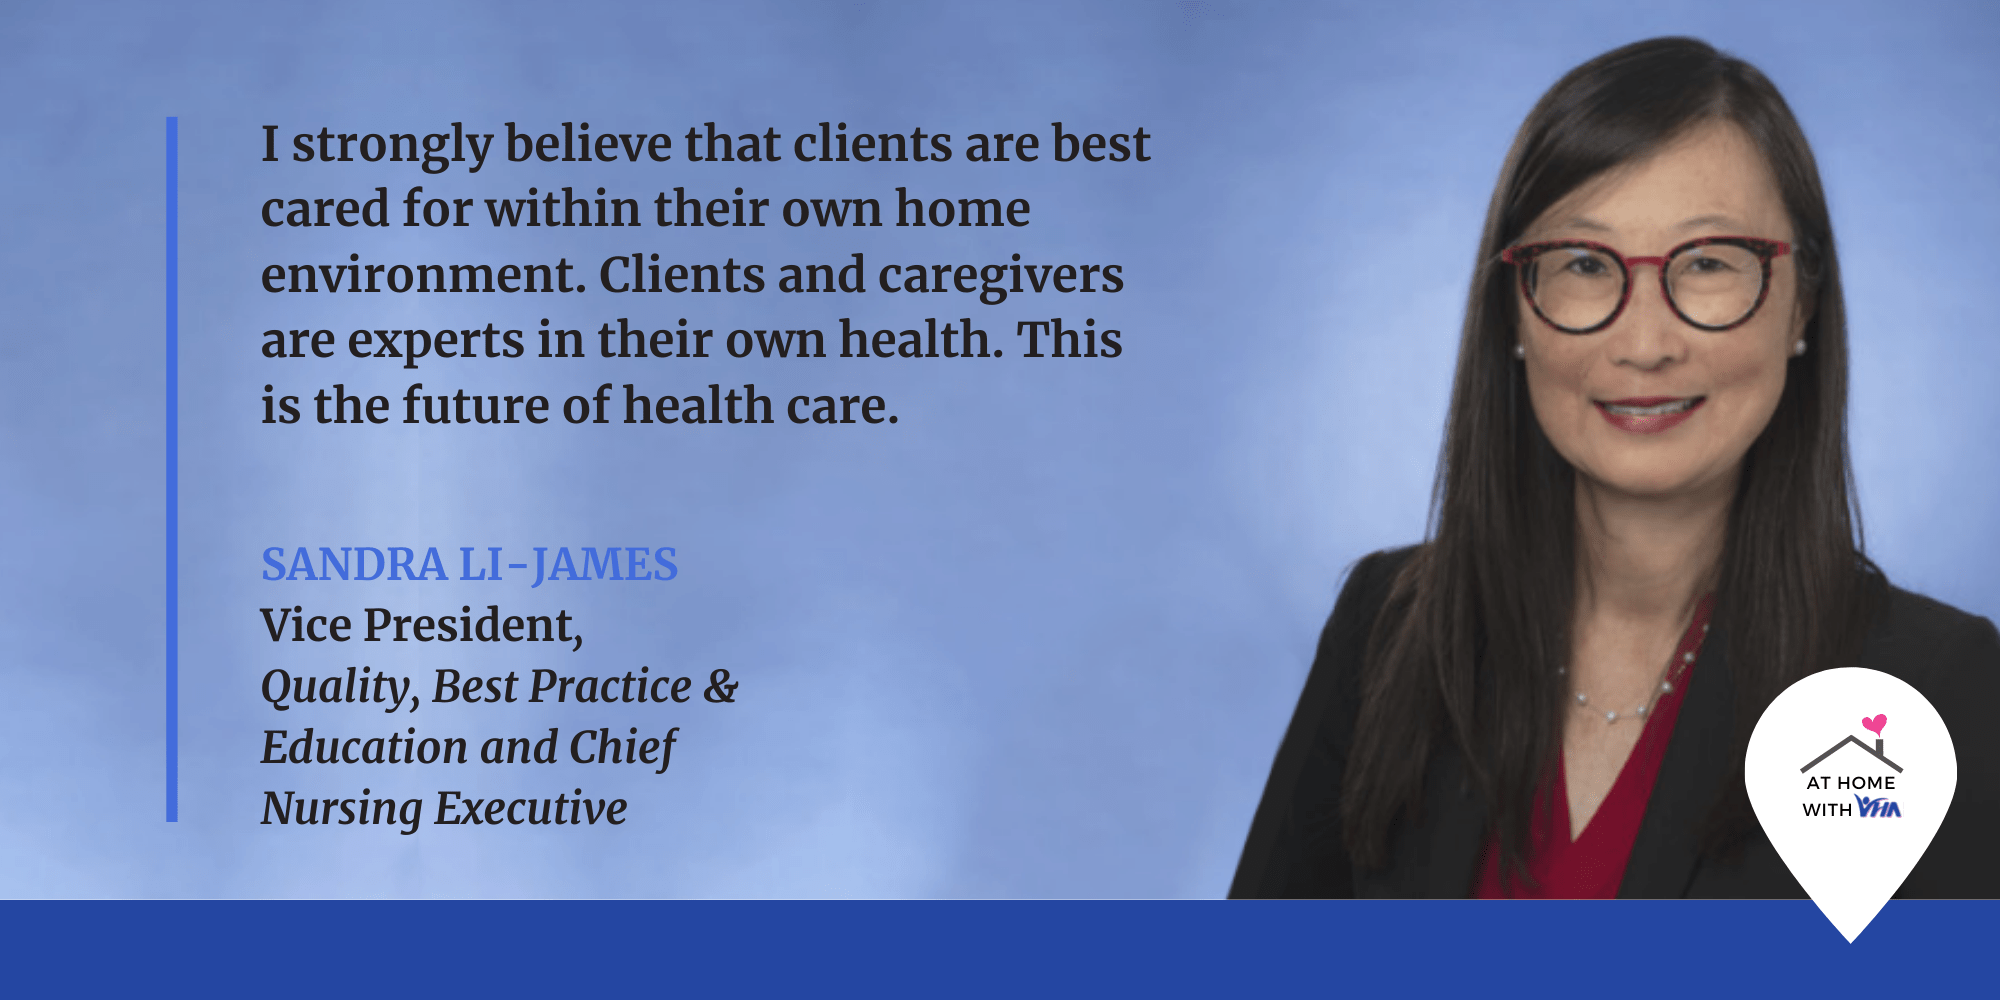 Featured image for “At Home with VHA: Meet Sandra Li-James, Vice President of Quality, Best Practice & Education and Chief Nursing Executive”